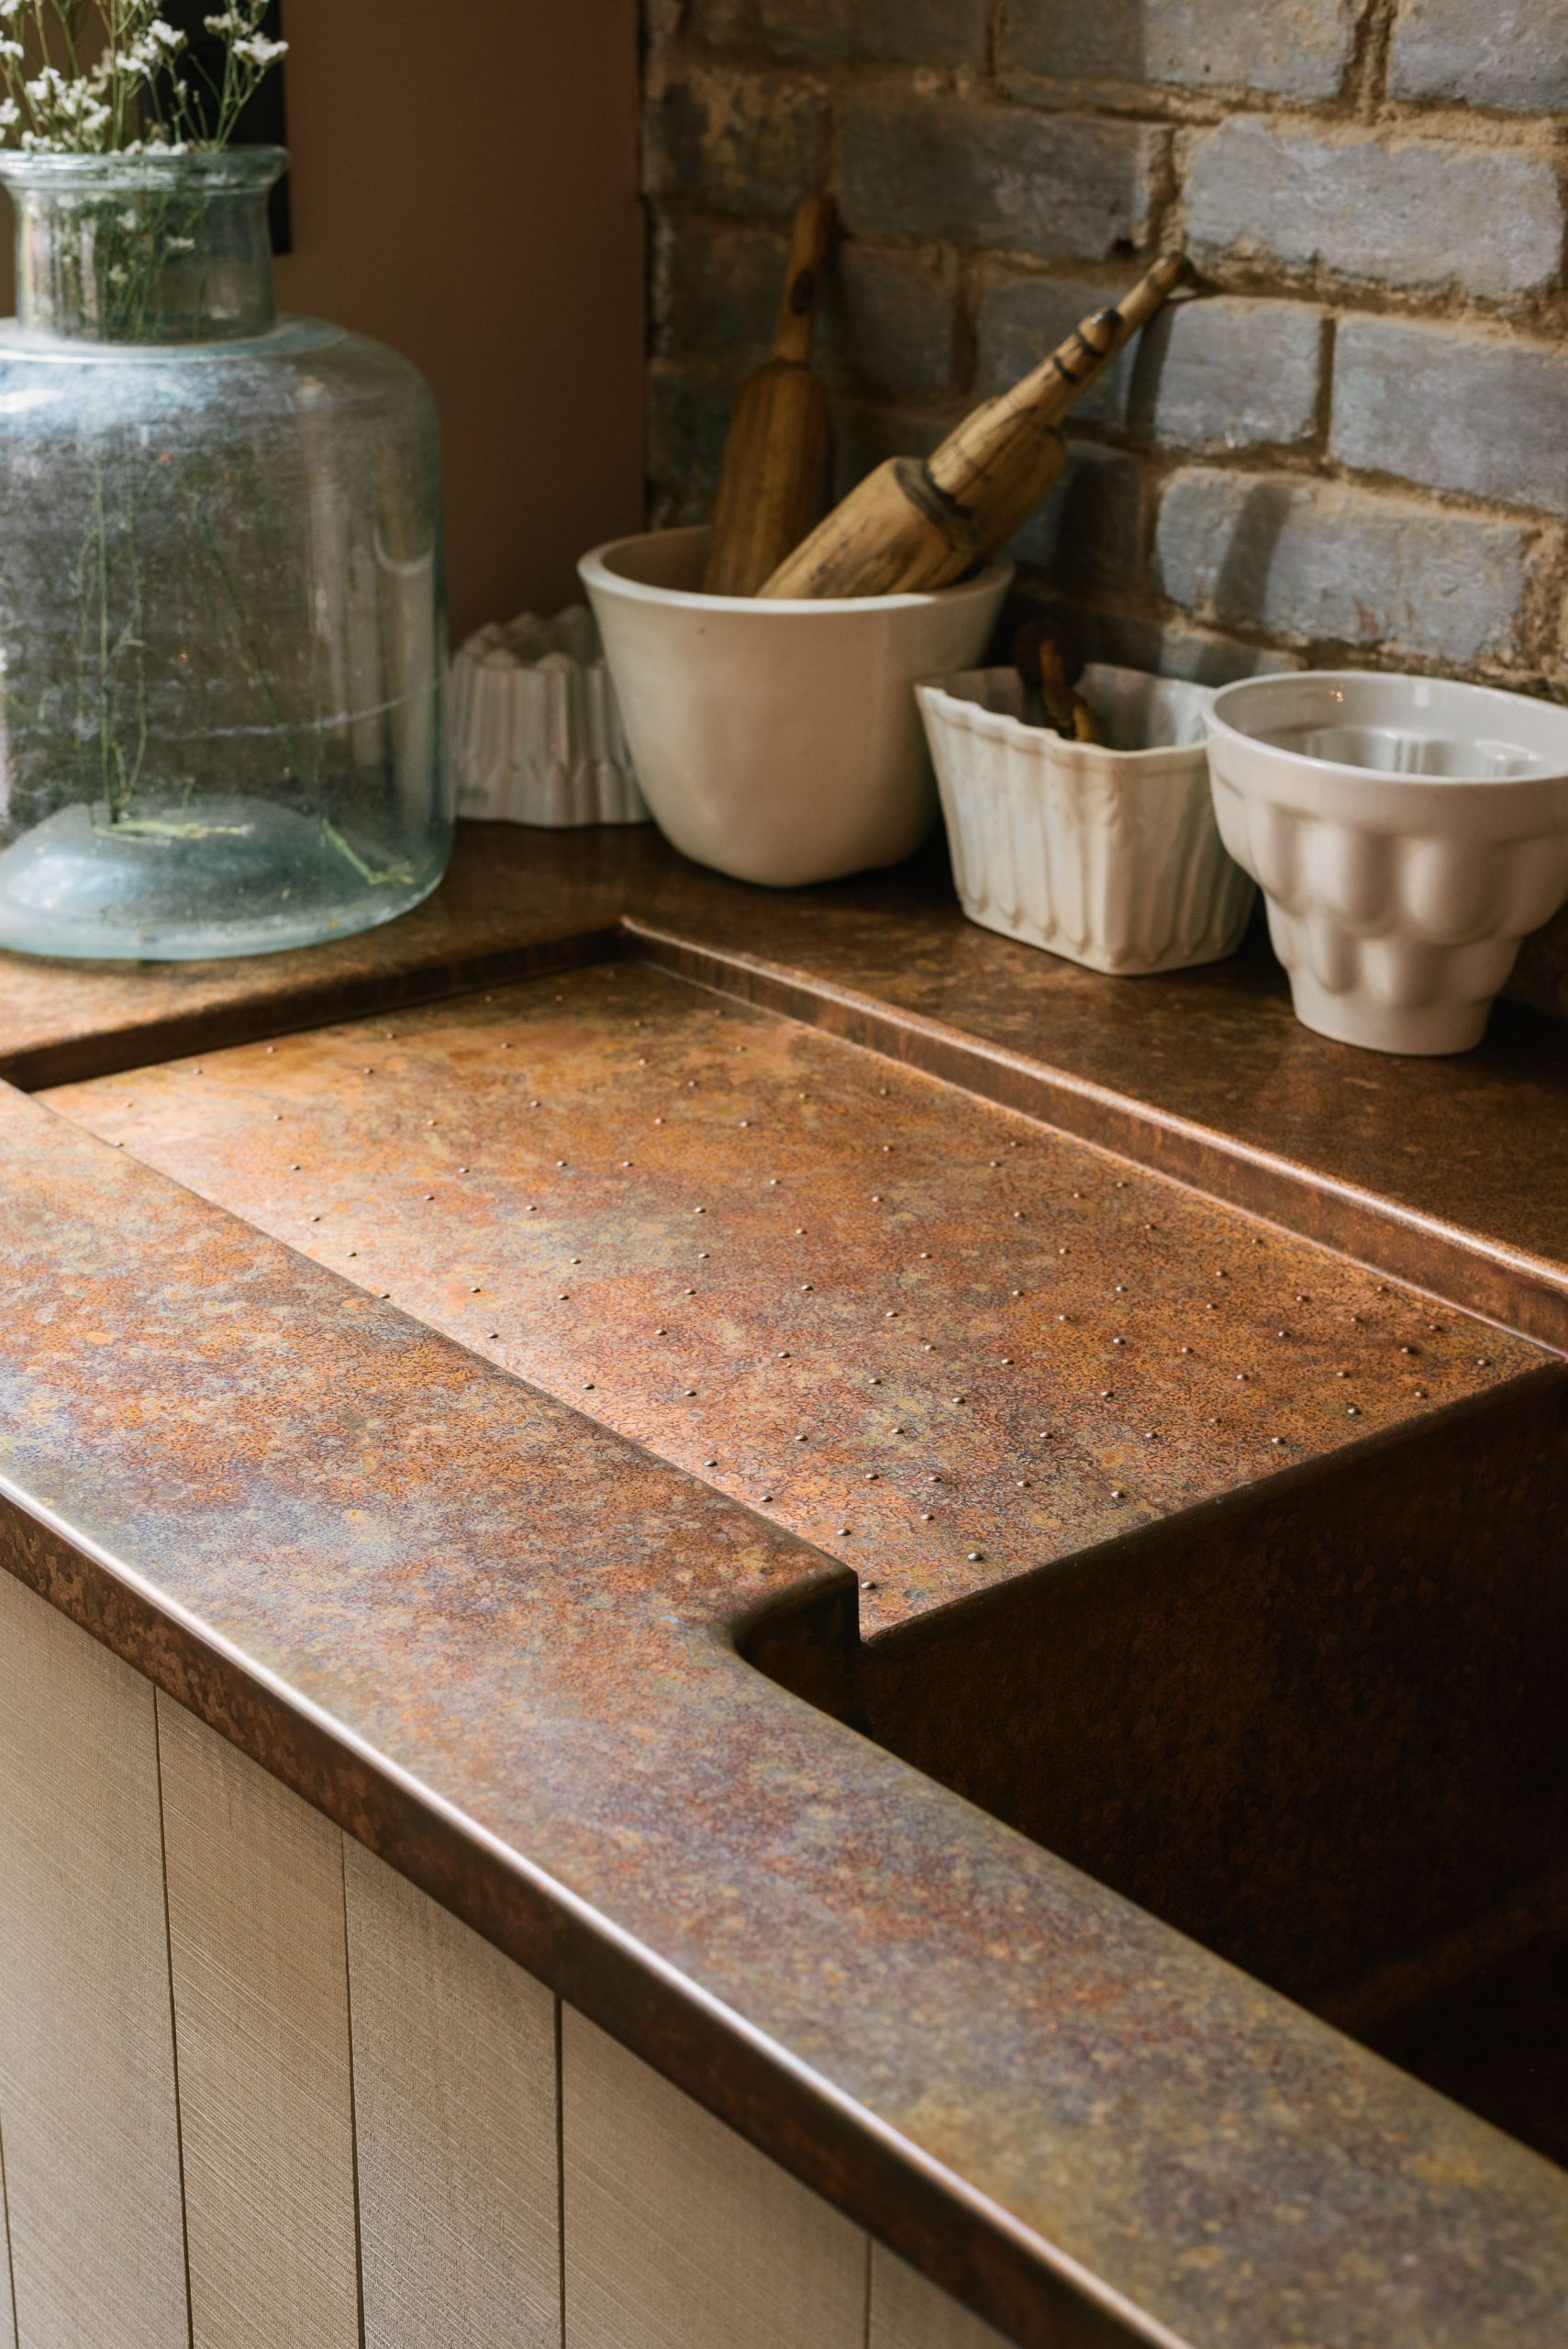 We went for one of our hand-aged copper worktops for the Sebastian Cox Potting S…